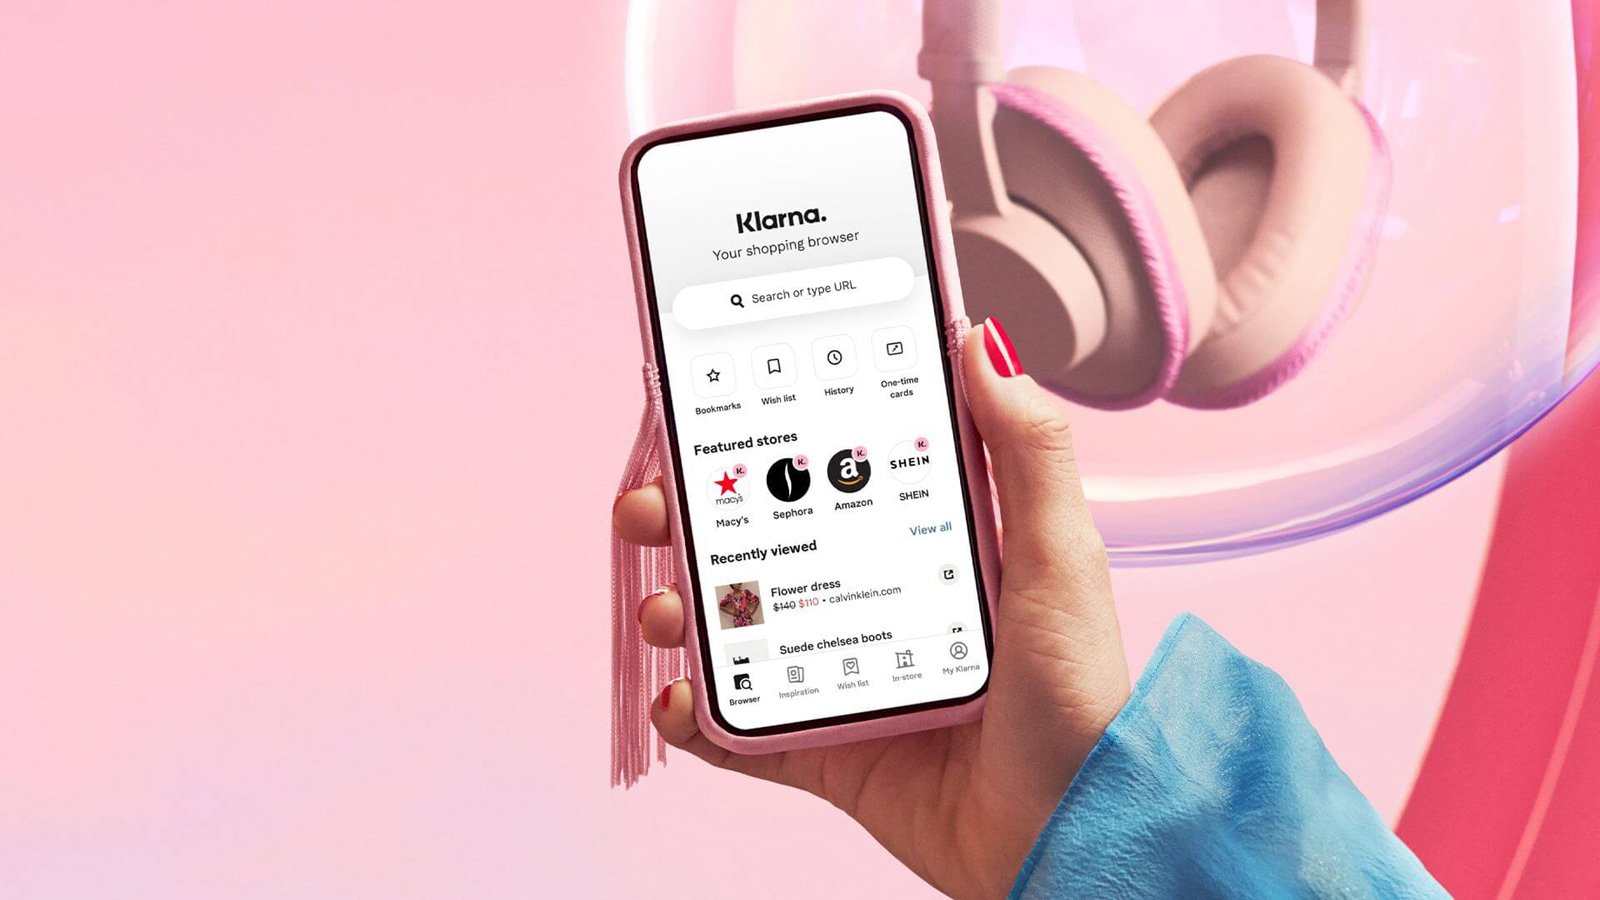 Klarna cell app bug let customers log into different prospects